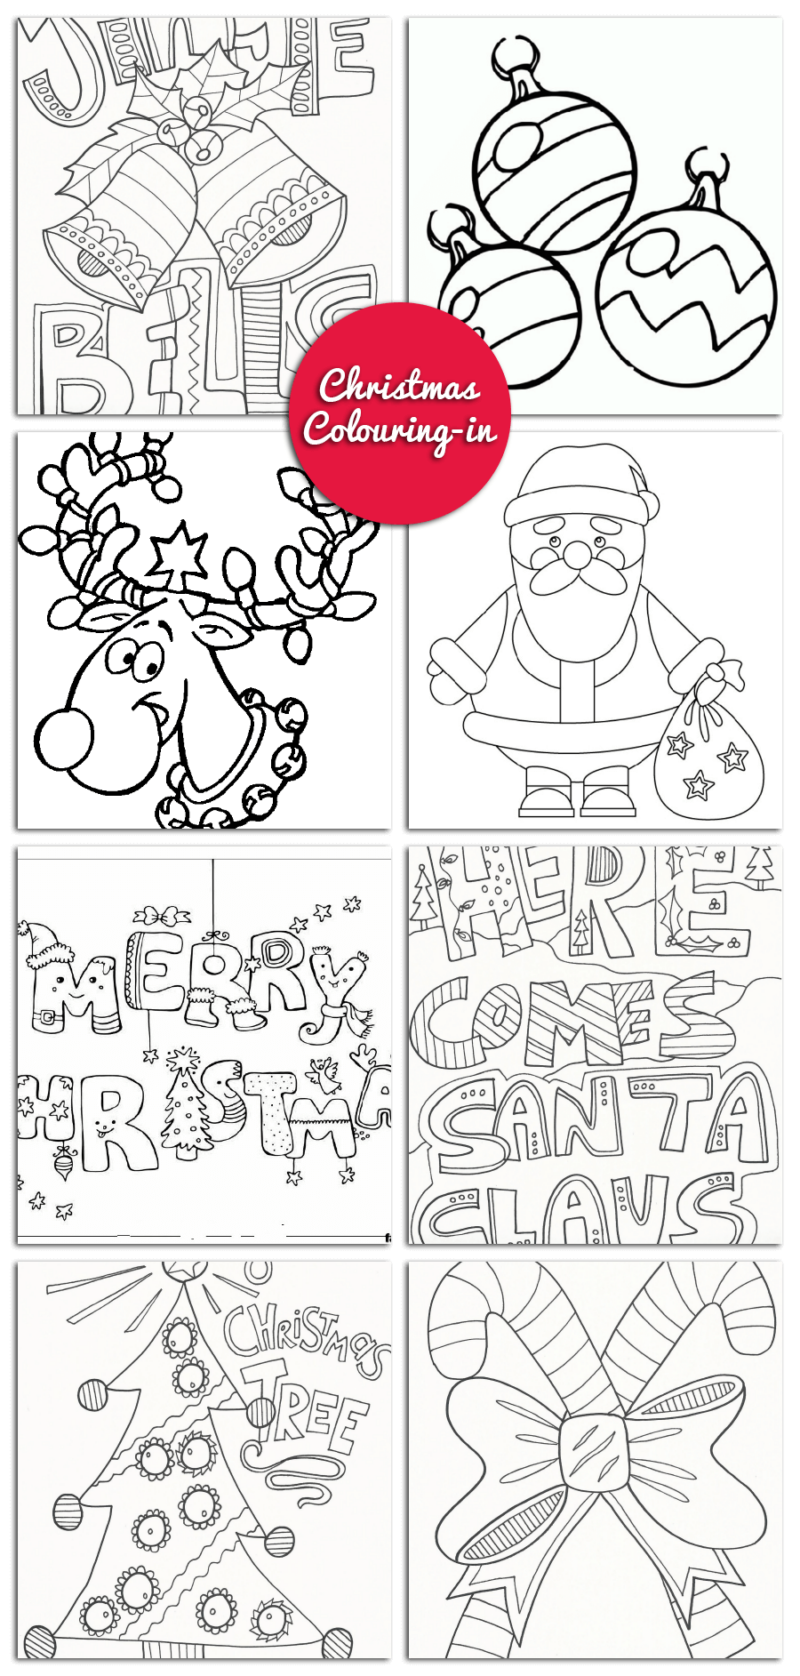 download christmas colouring in